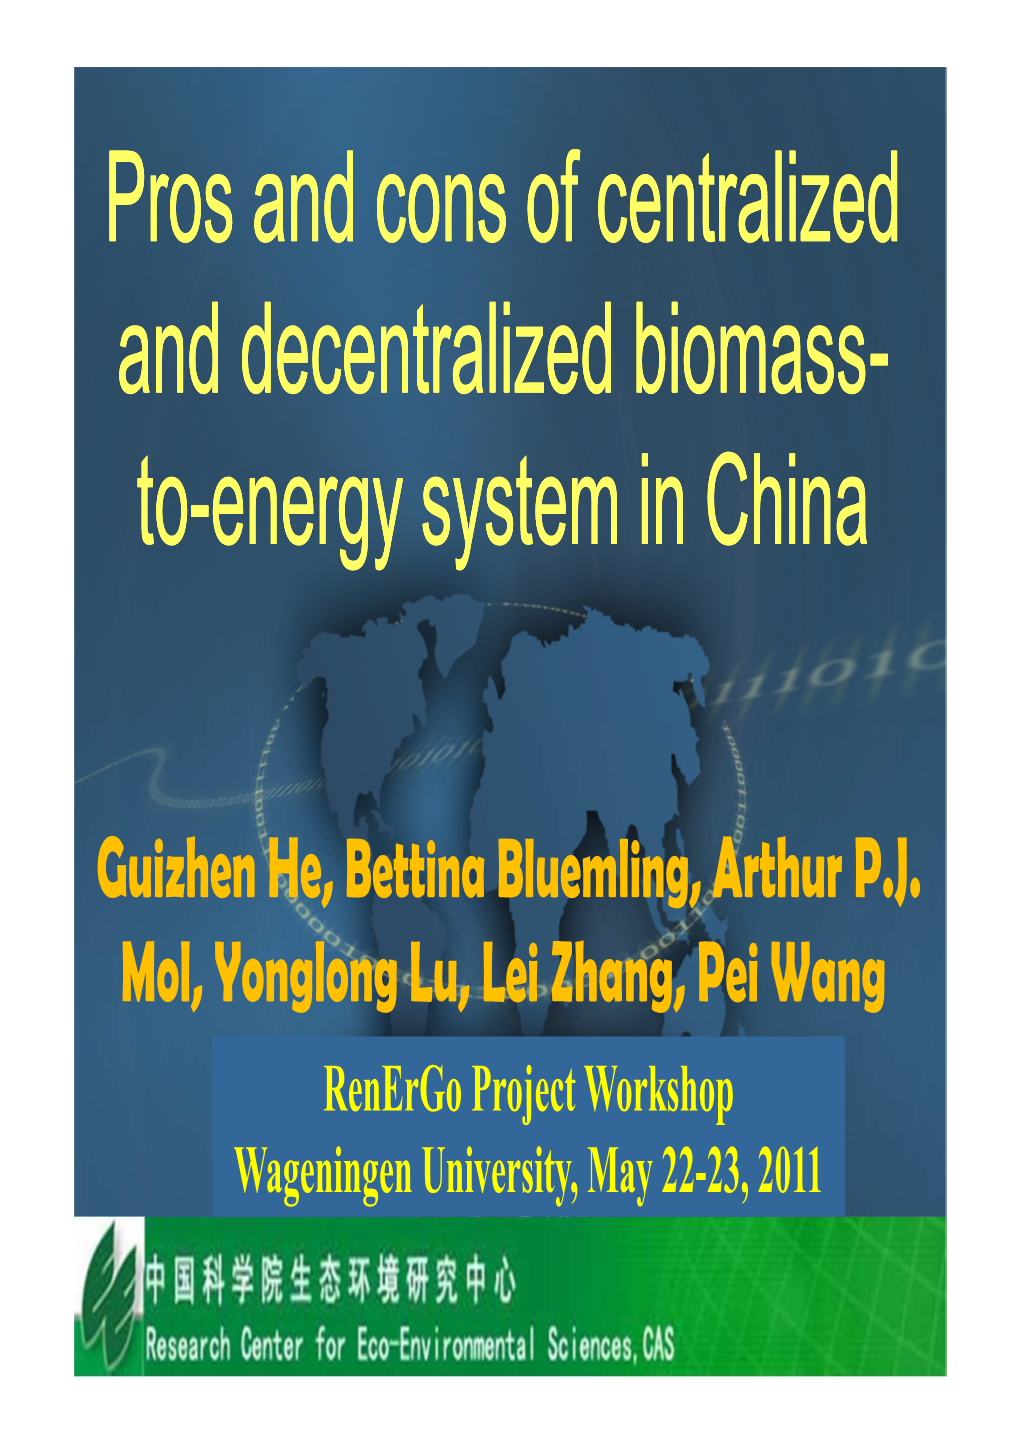 He: Centralized and Decentralized Biomass-To-Energy Systems?